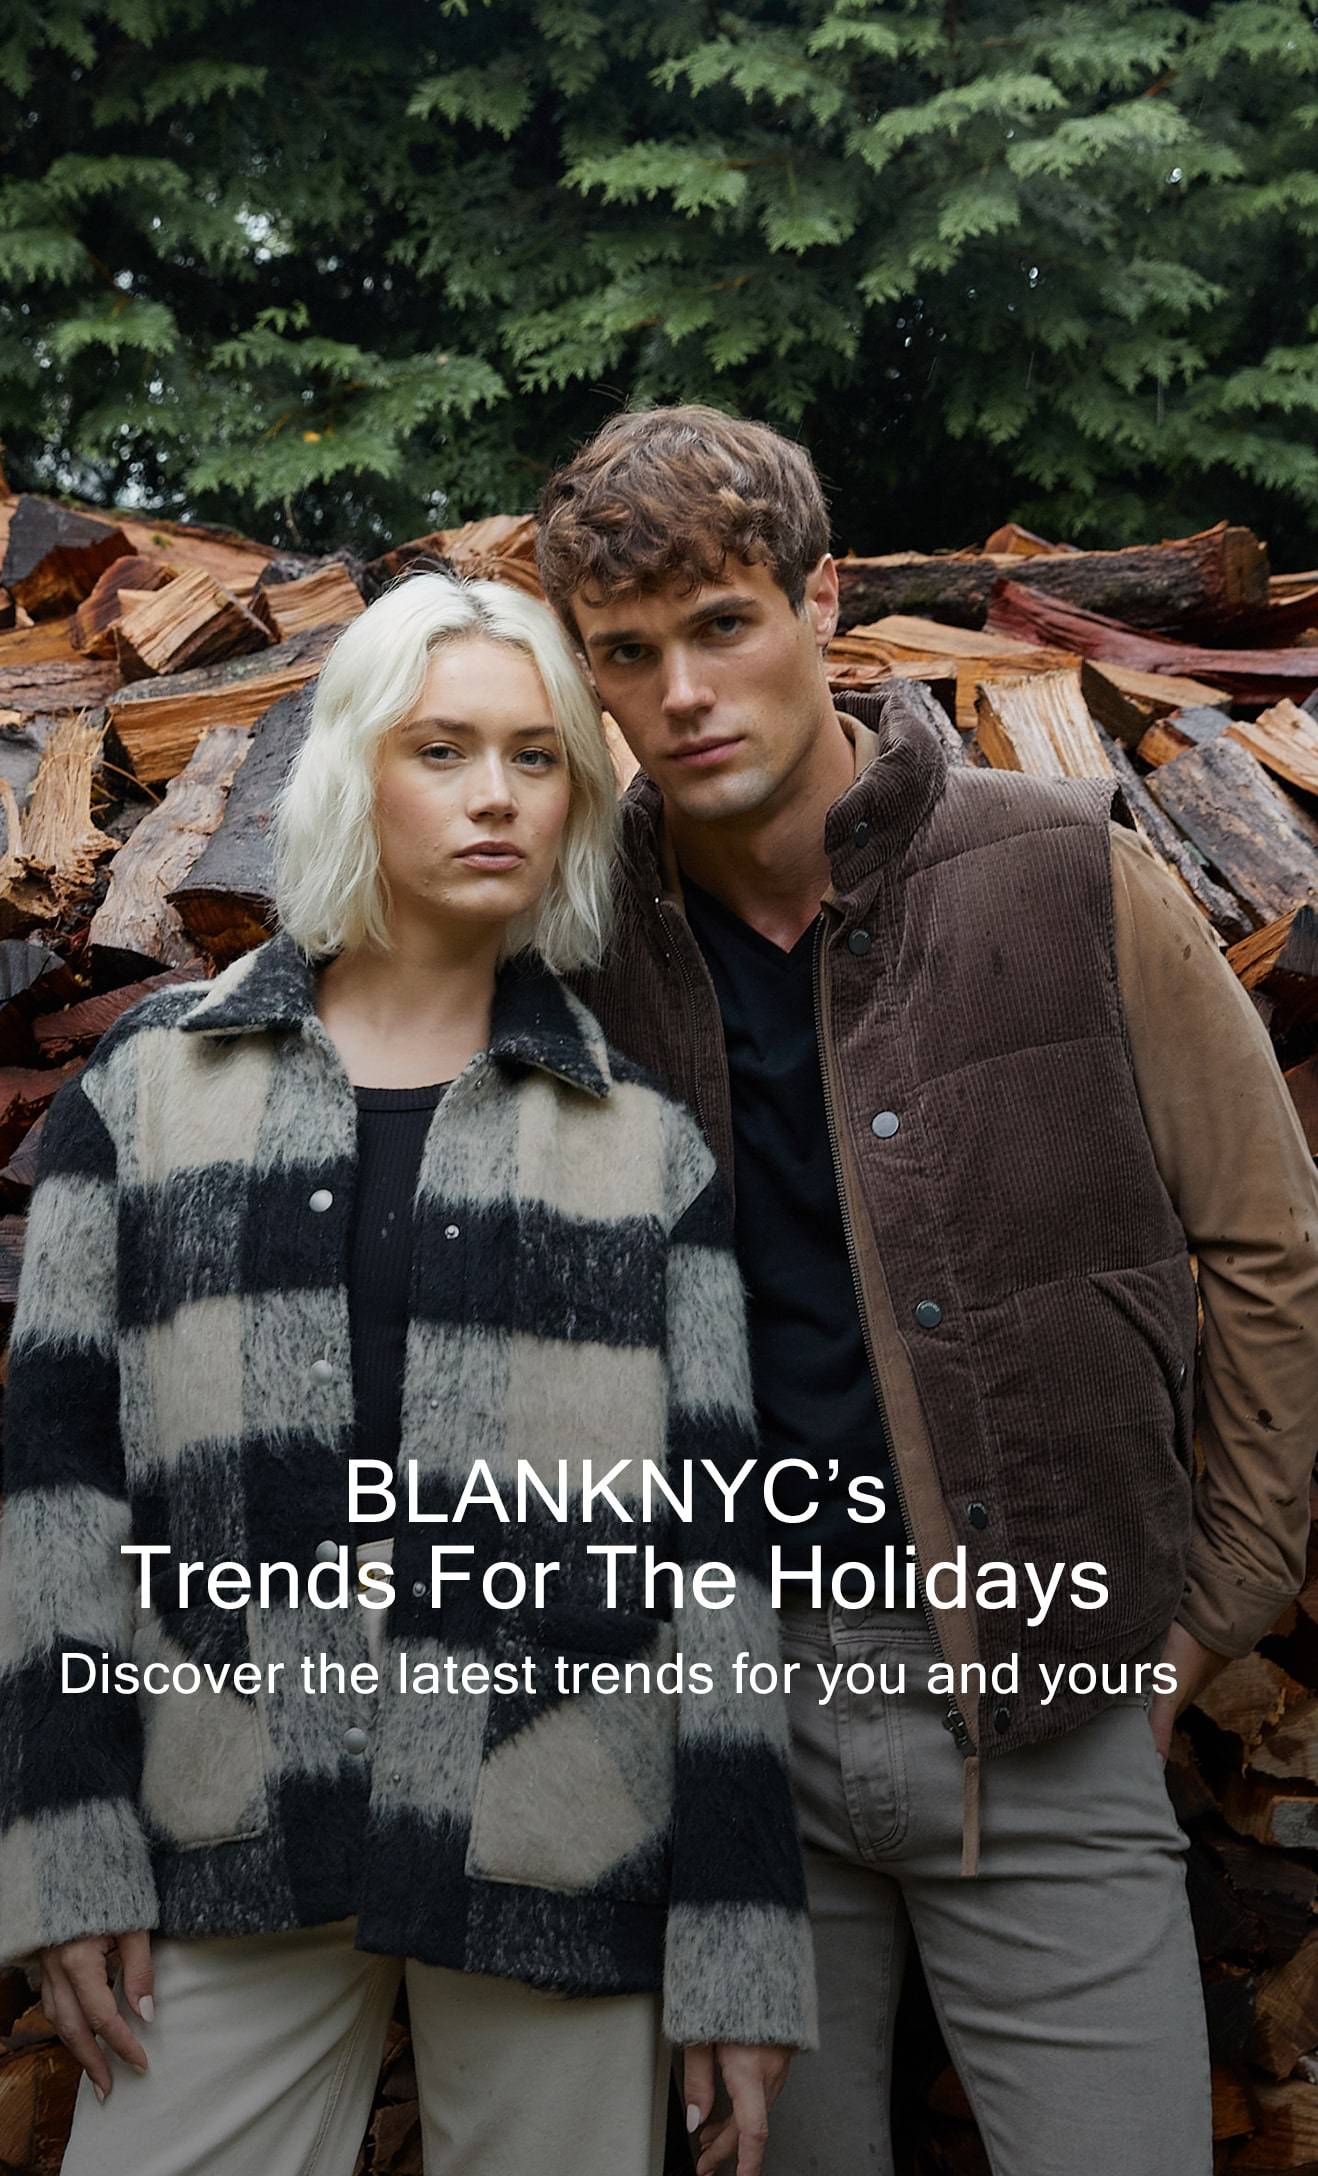 BLANKNYC’s Trends For The Holidays